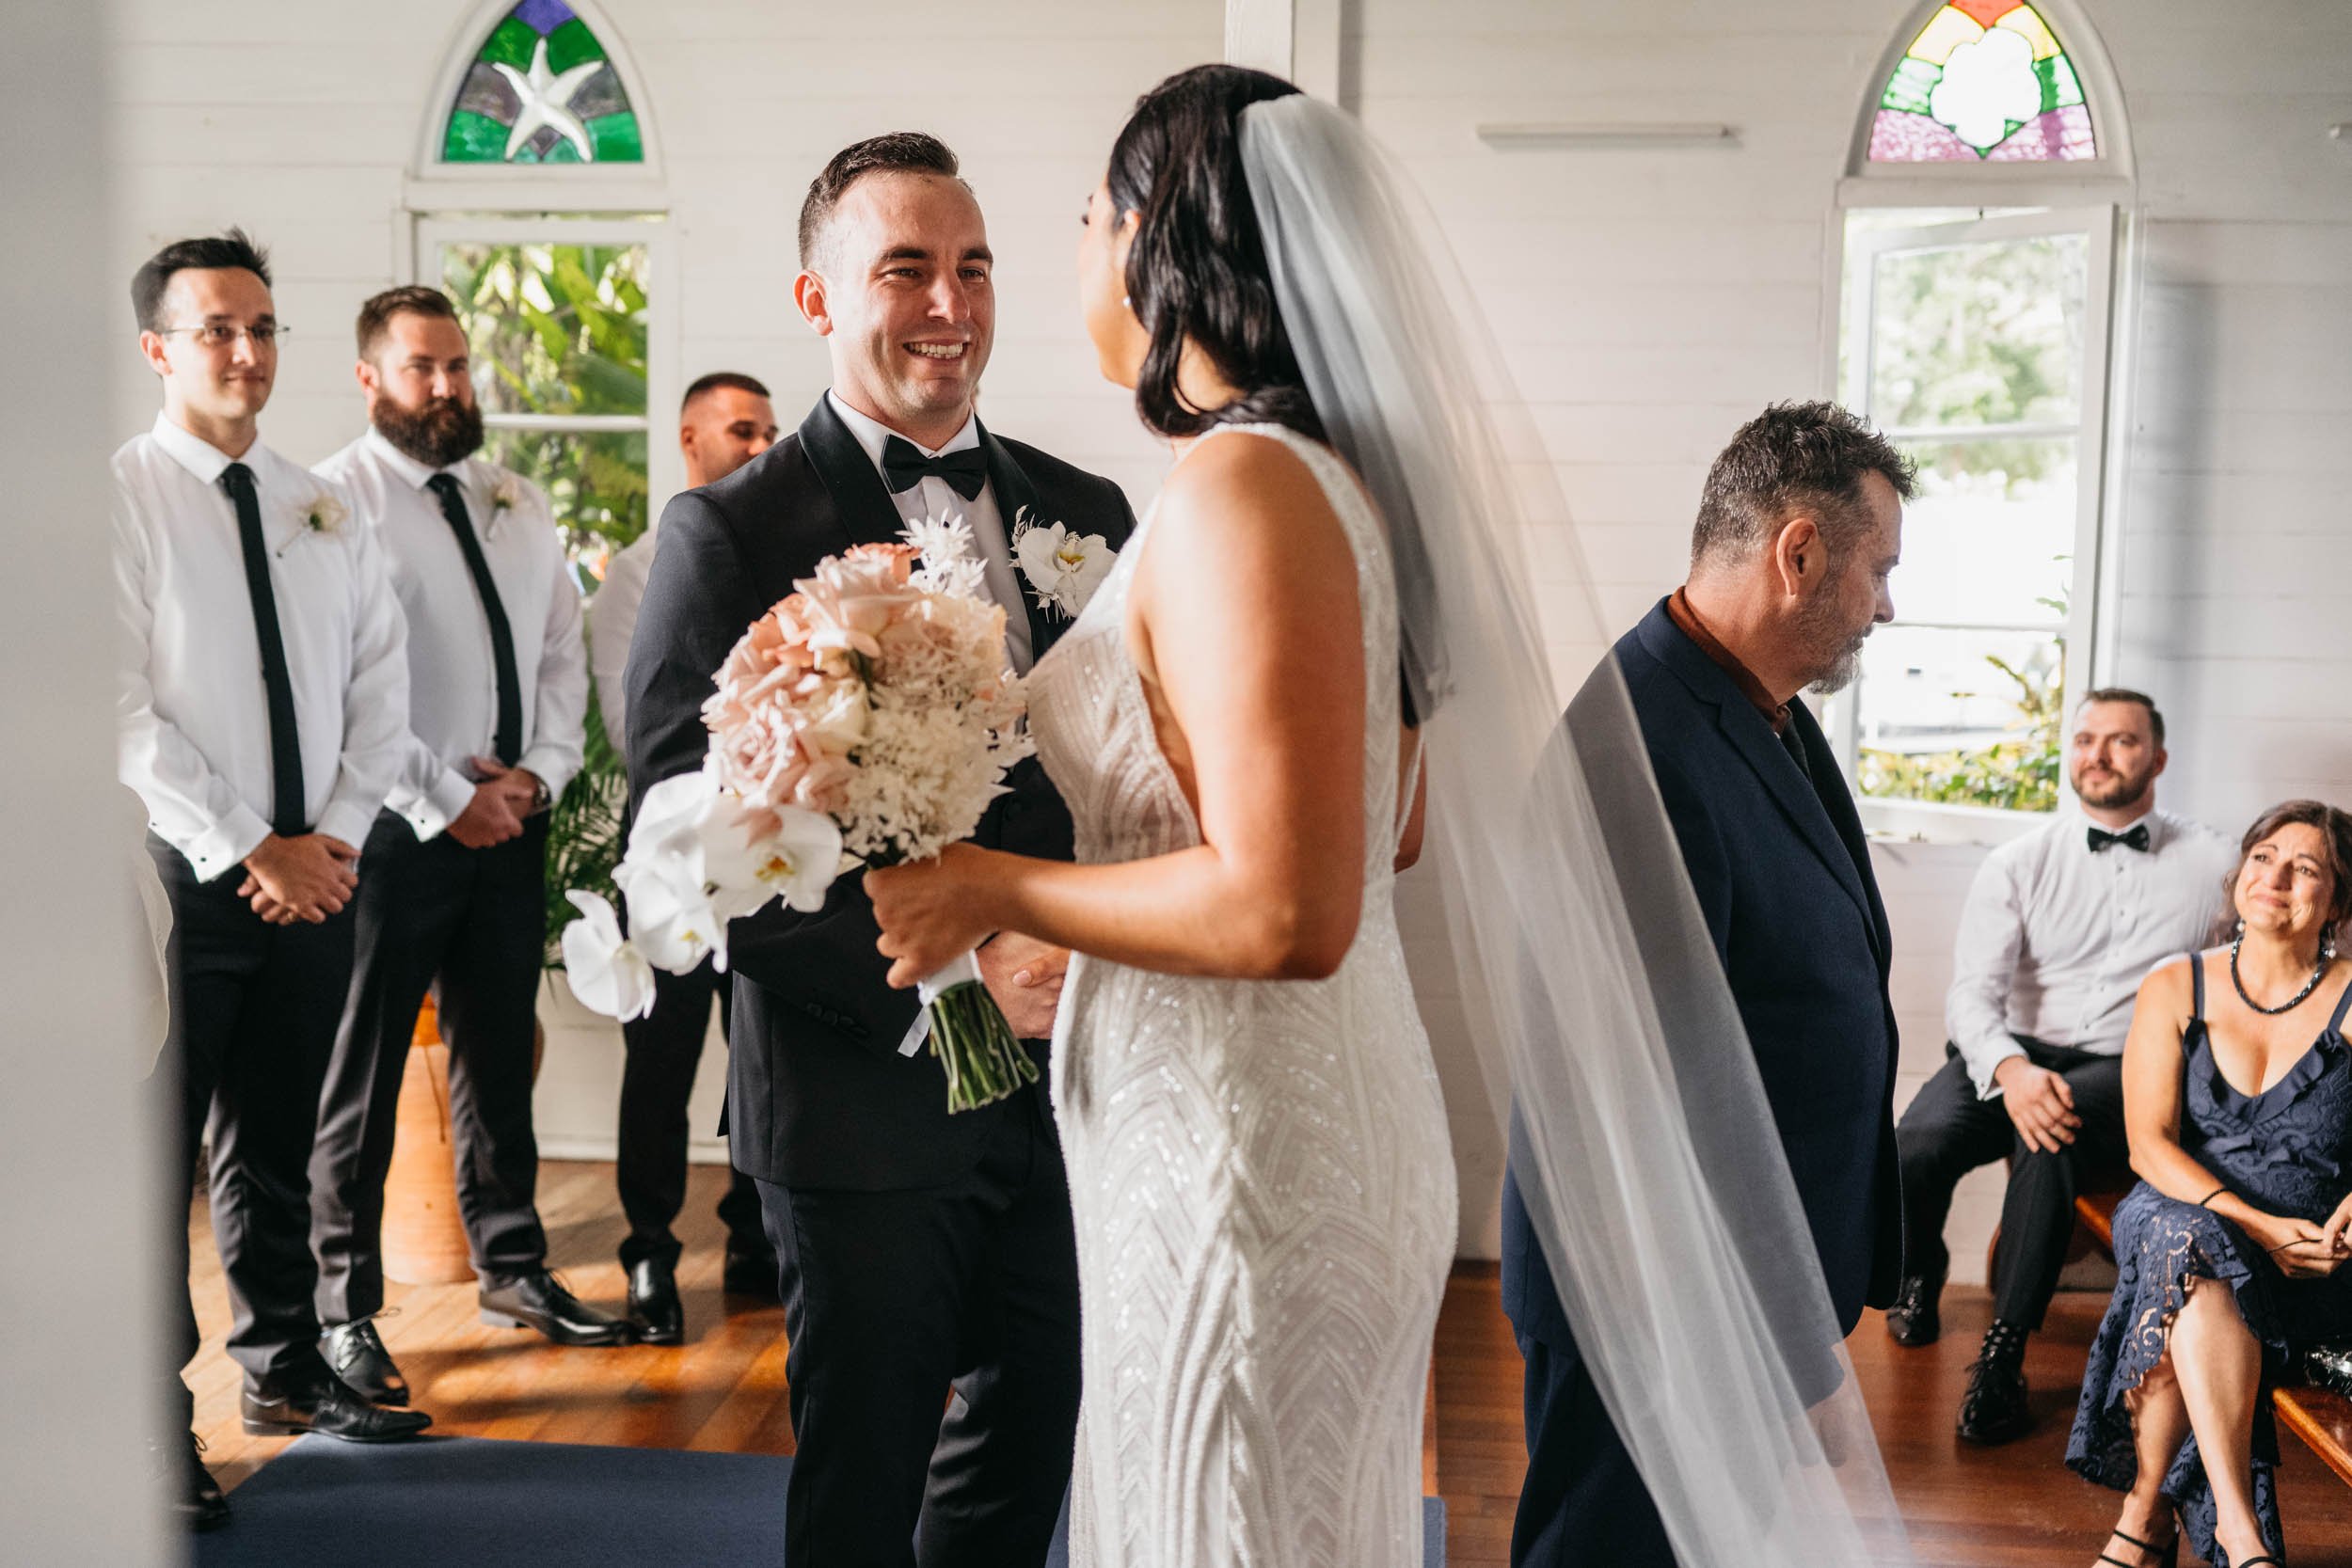 The Raw Photographer - Cairns Wedding Photographer - Port Douglas ceremony venues and locations ST MARYS-4.jpg